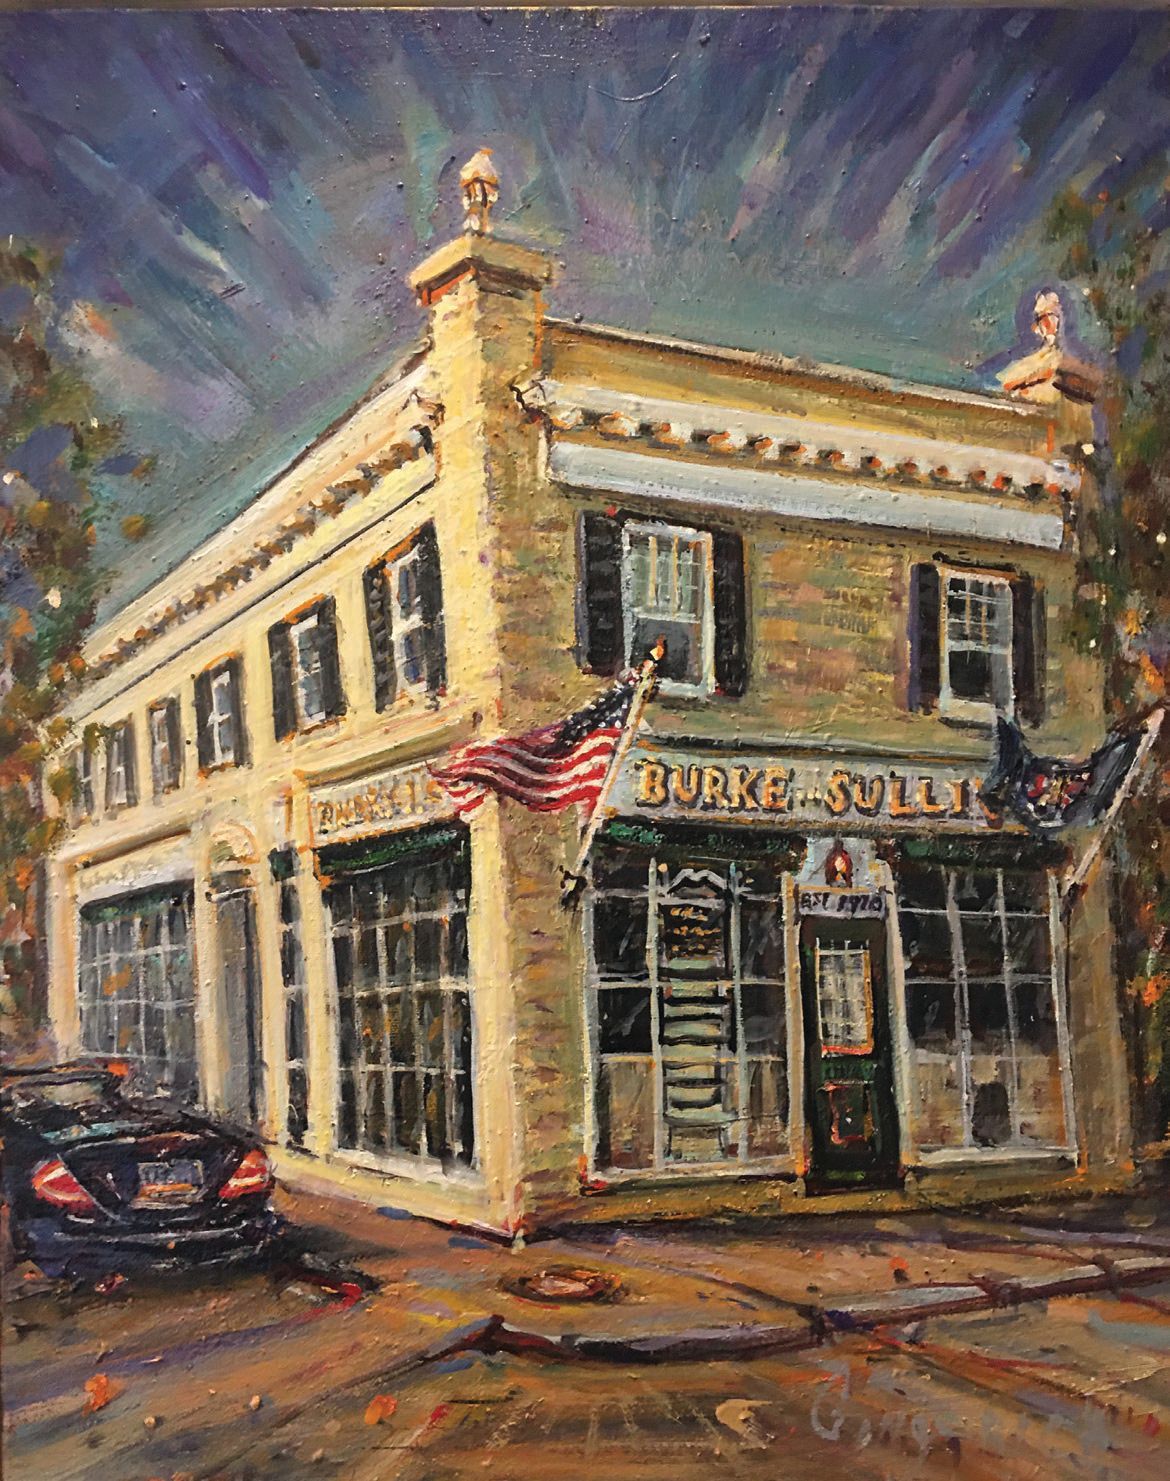 Painting of Burke & Sullivan’s law practice building in Southampton PAINTING BY JIM GINGERICH